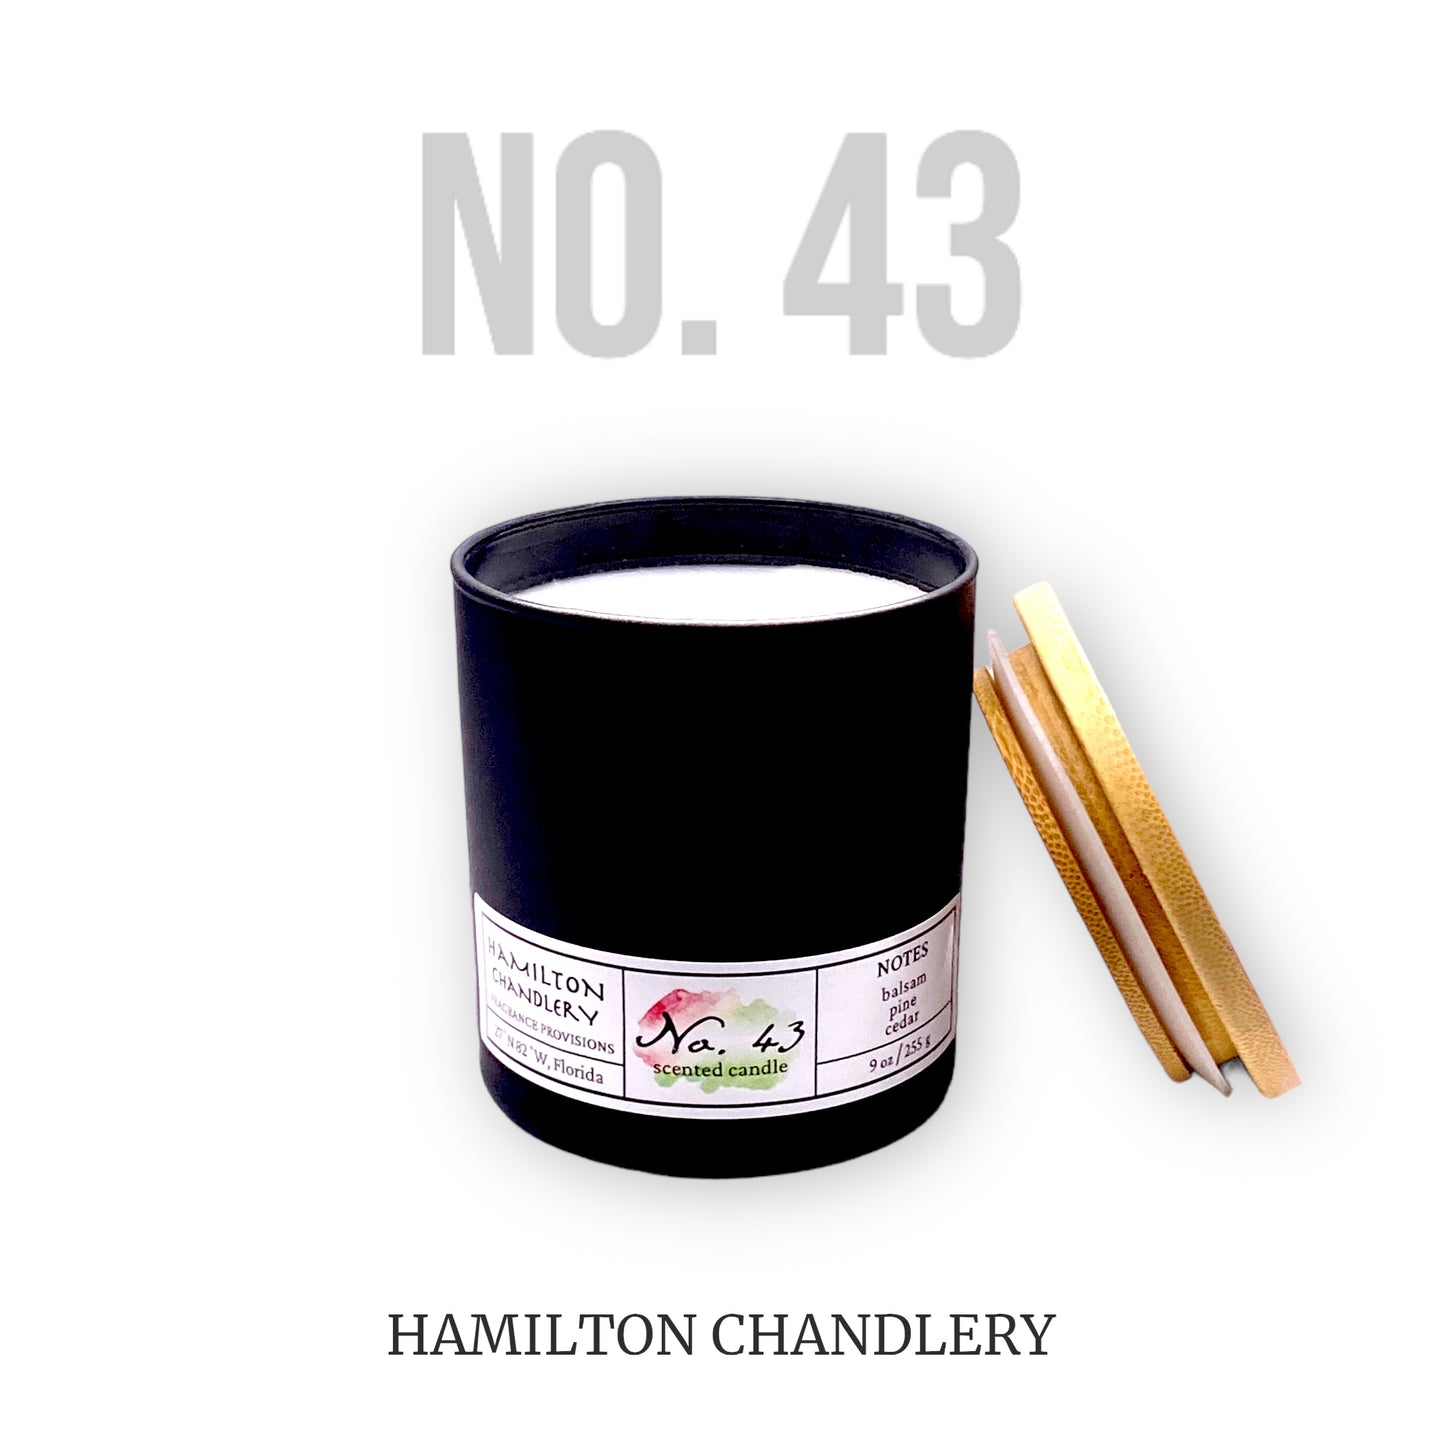 Fragrance No. 43 Minimalistic Candle with White Background | Hamilton Chandlery